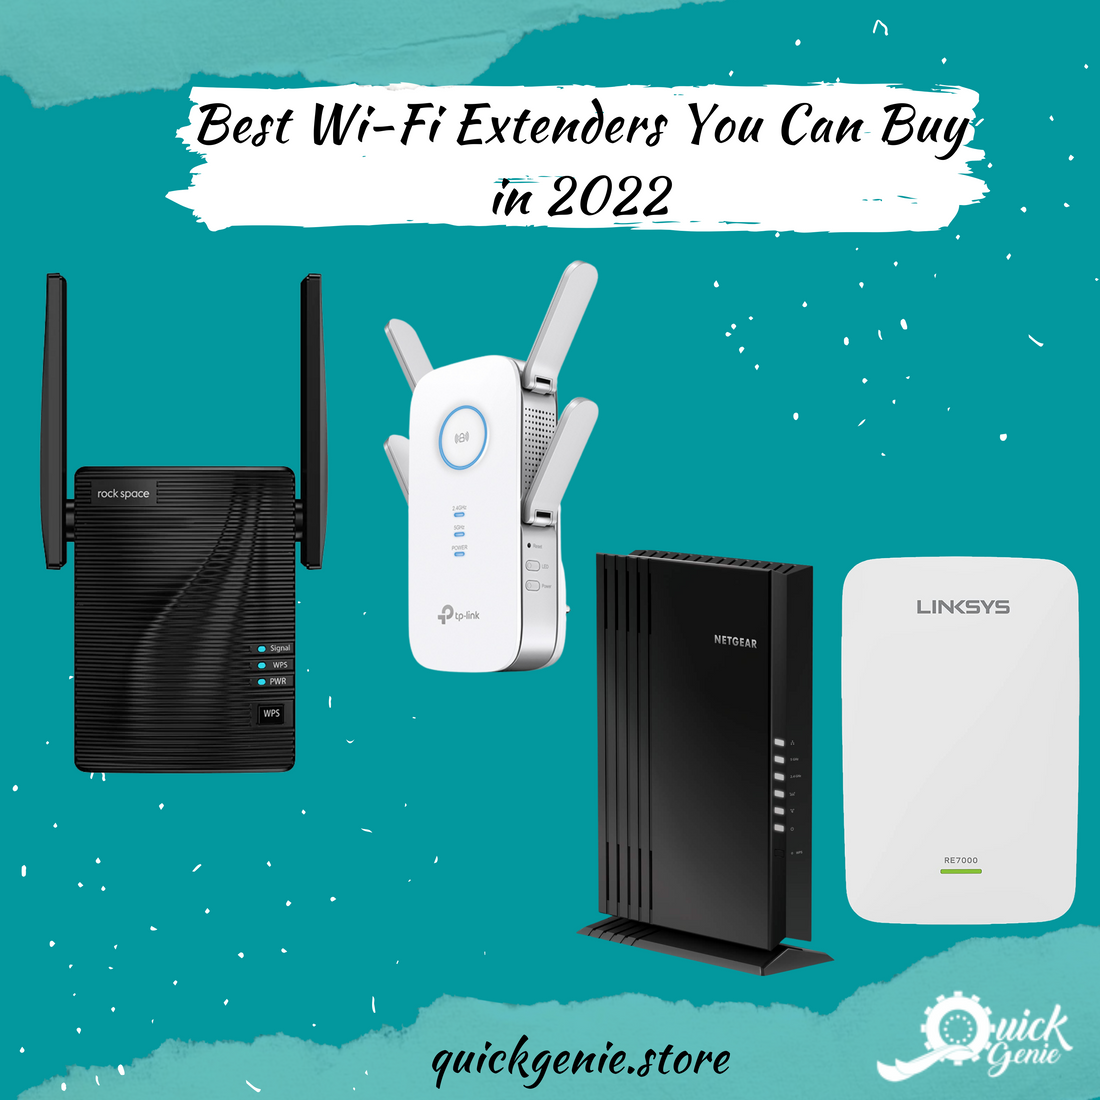 Best Wi-Fi Extenders You Can Buy in 2022